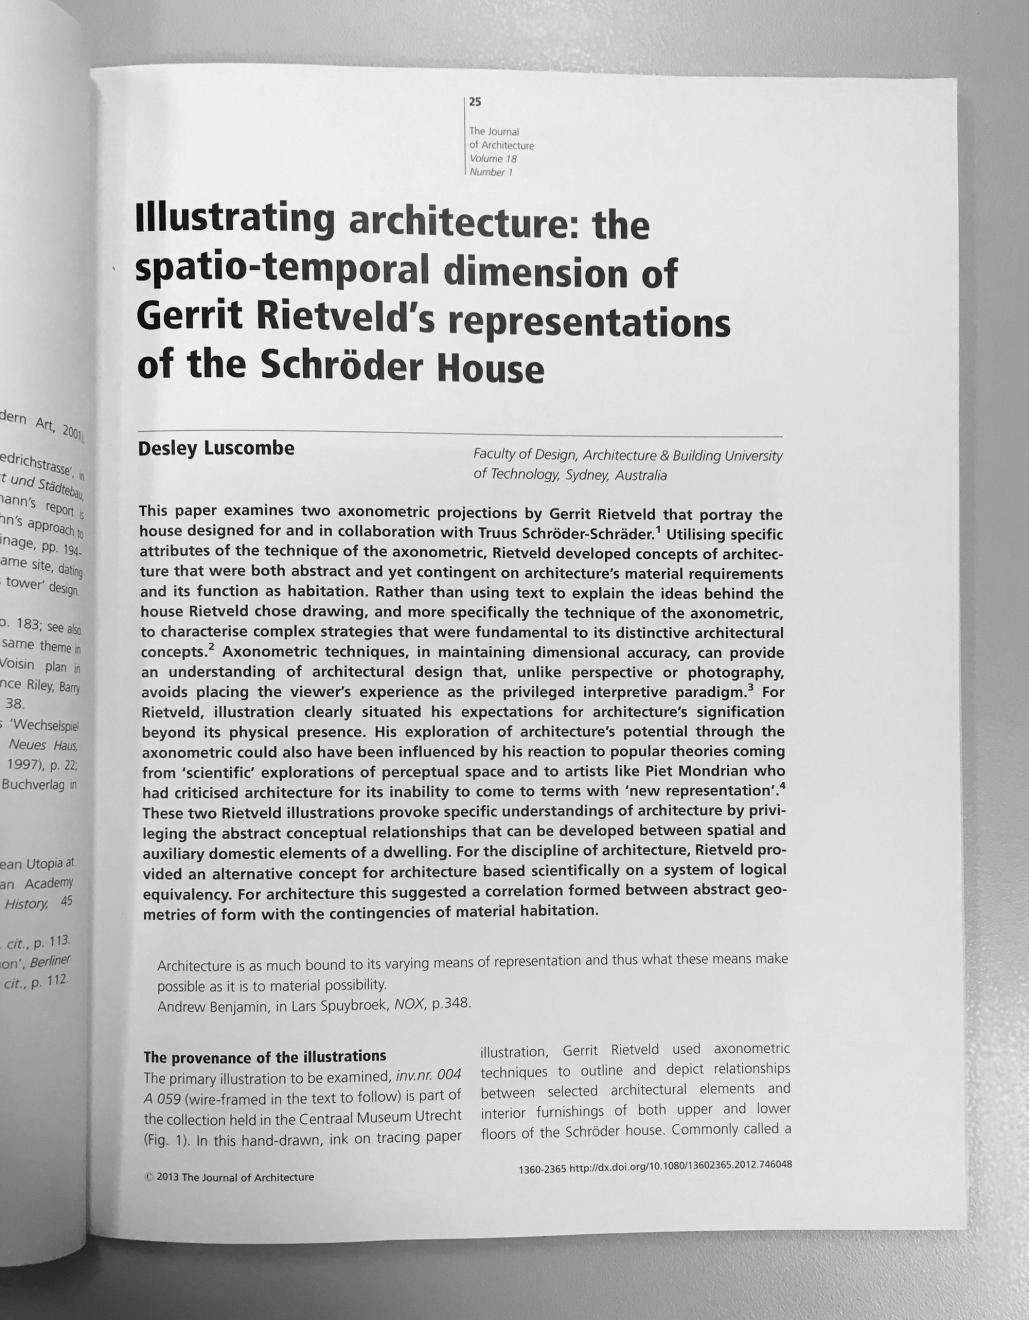 DAB Staff Project: Illustrating architecture: the spatio-temporal dimension of Gerrit Rietveld’s representations of the Schröder House, by Desley Luscombe